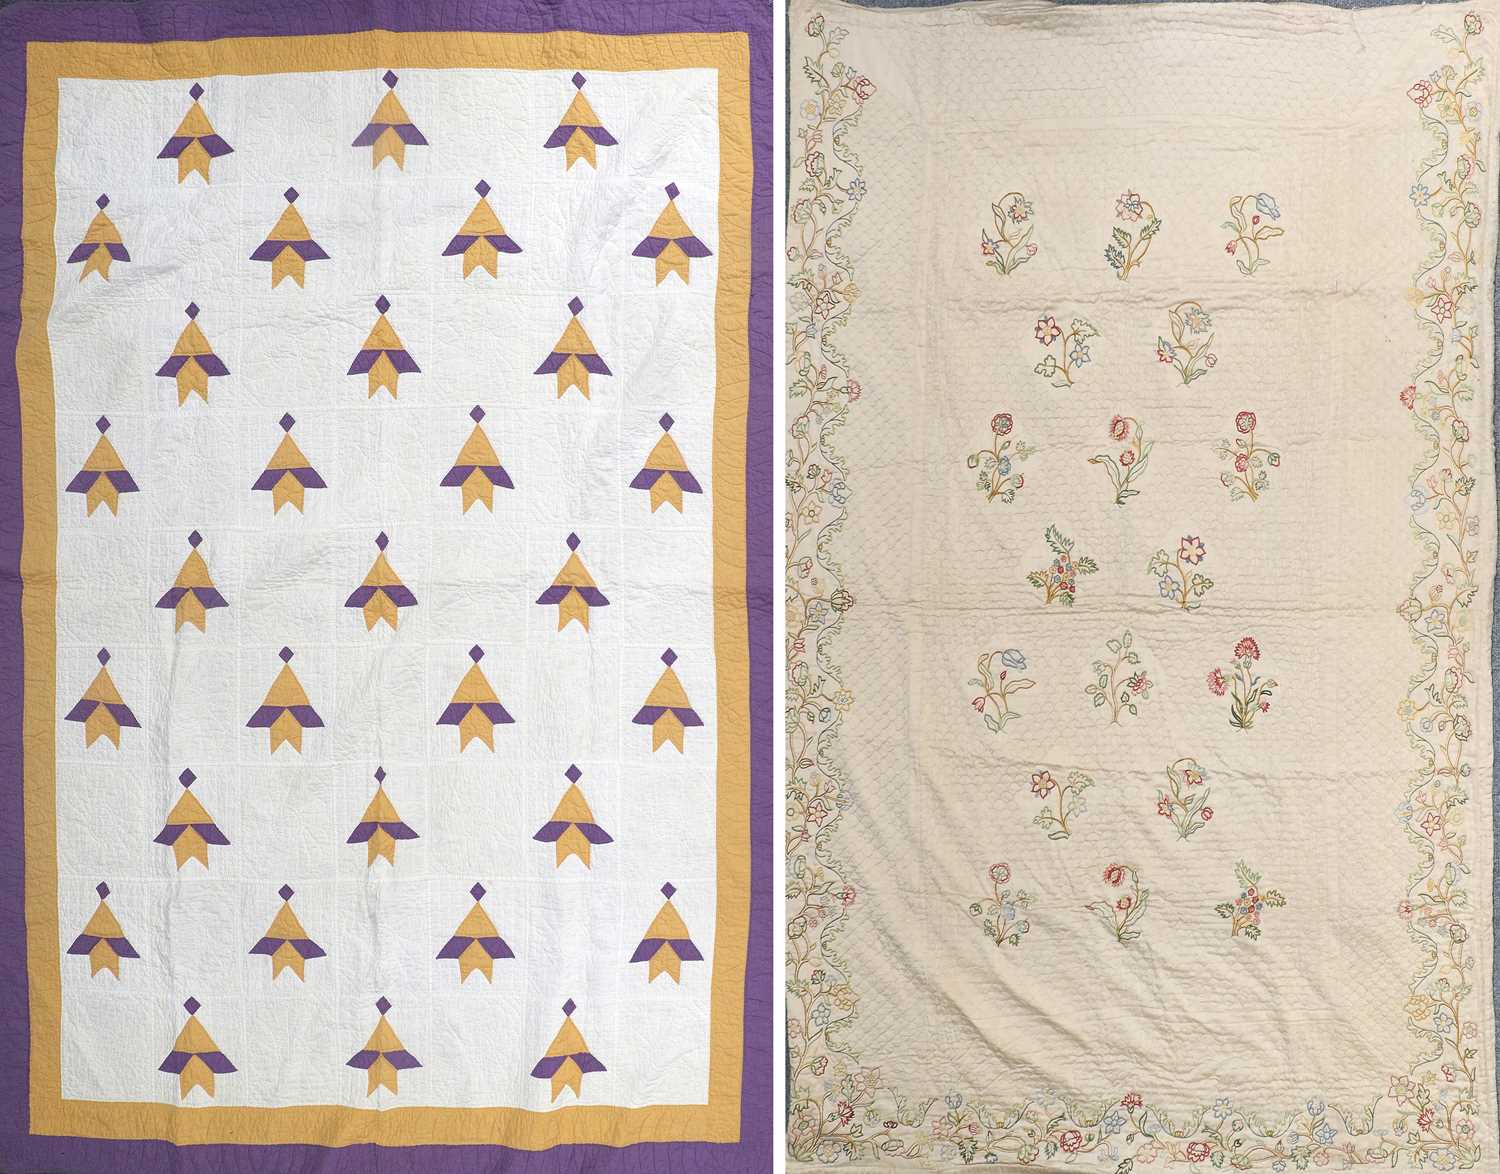 Early 20th Century Quilt, worked in purple and yellow patched shapes in alternating squares on a